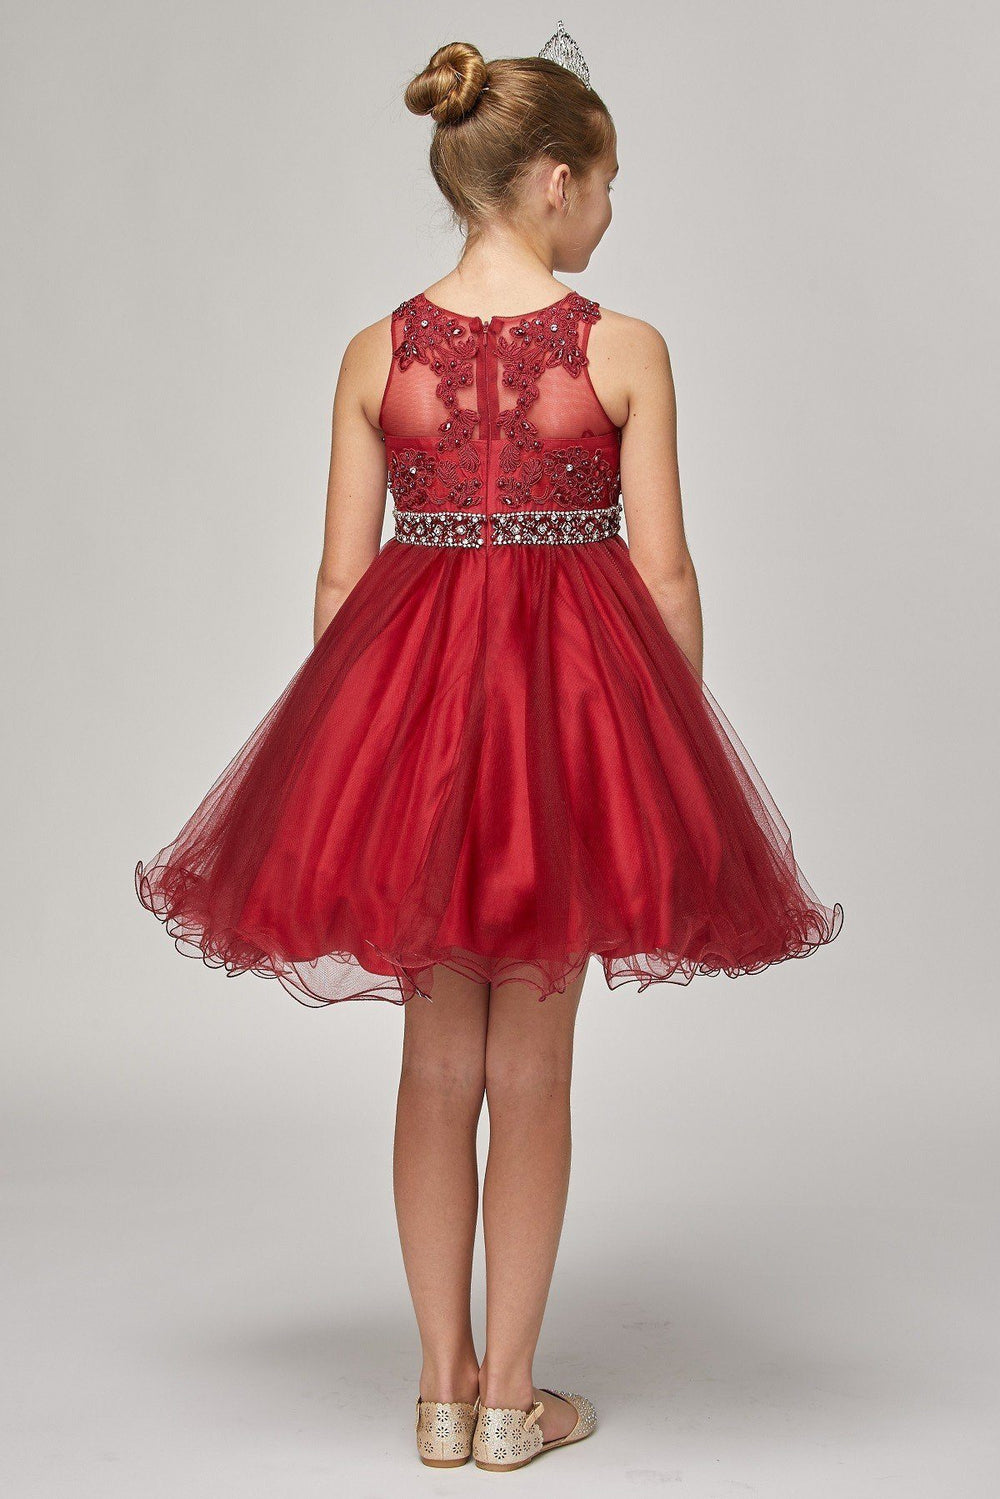 Girls Short Ruffled Dress with Beaded Bodice by Cinderella Couture 5013-Girls Formal Dresses-ABC Fashion